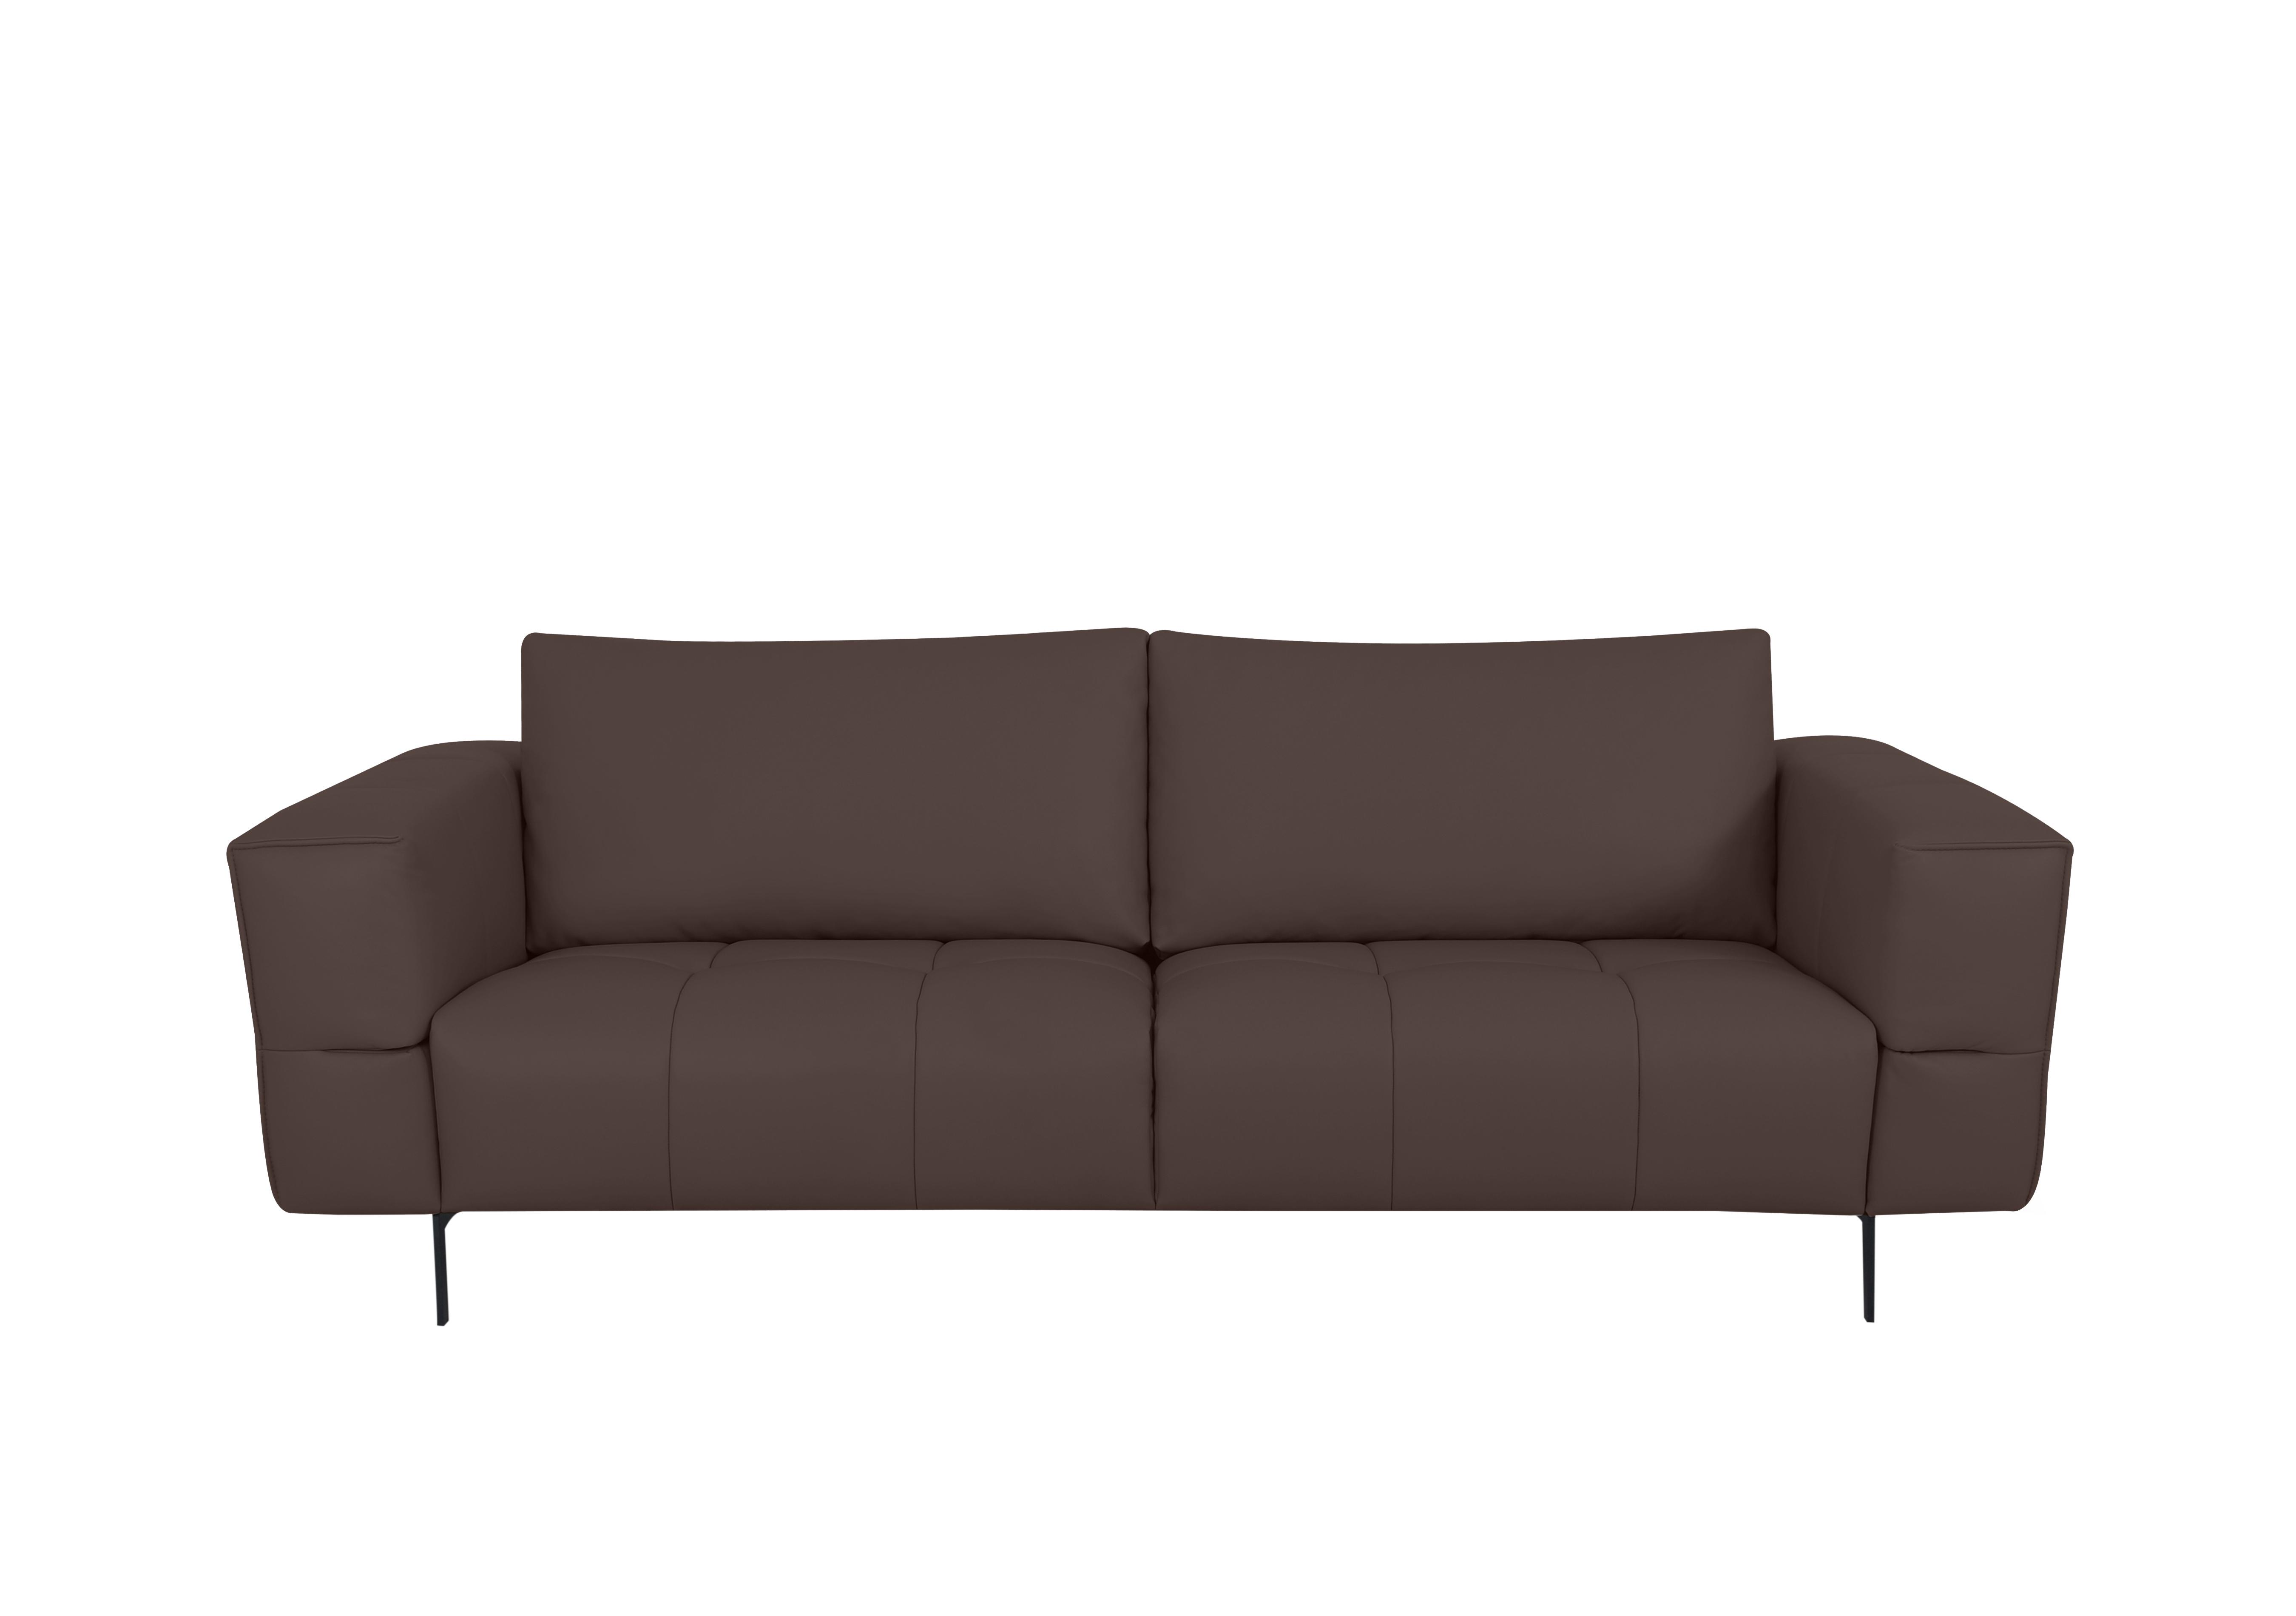 Lawson 3 Seater Leather Sofa in Nn-512e Cacao Brown on Furniture Village